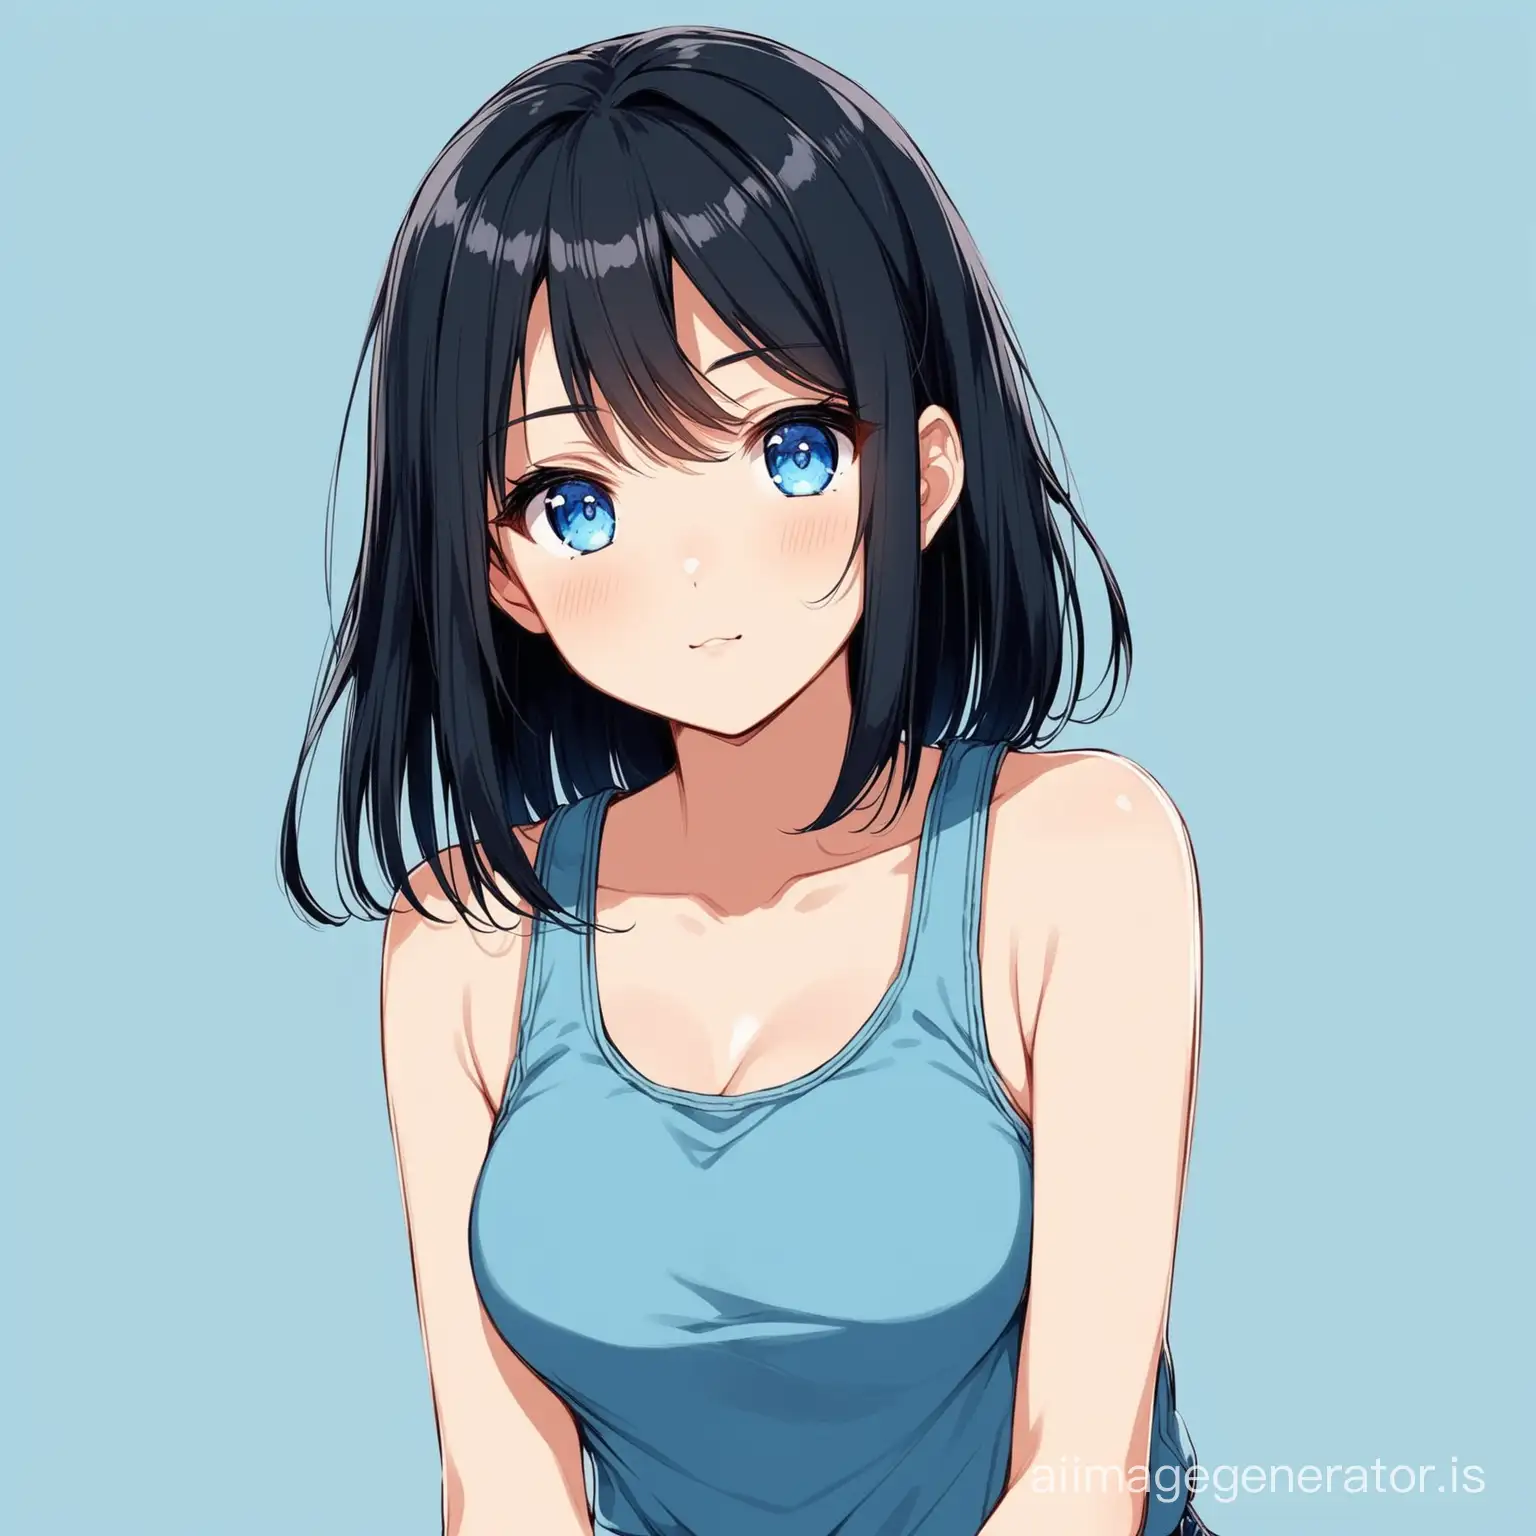 Adorable-Anime-Girl-in-Casual-Attire-Black-Hair-and-Blue-Eyes-Fashion